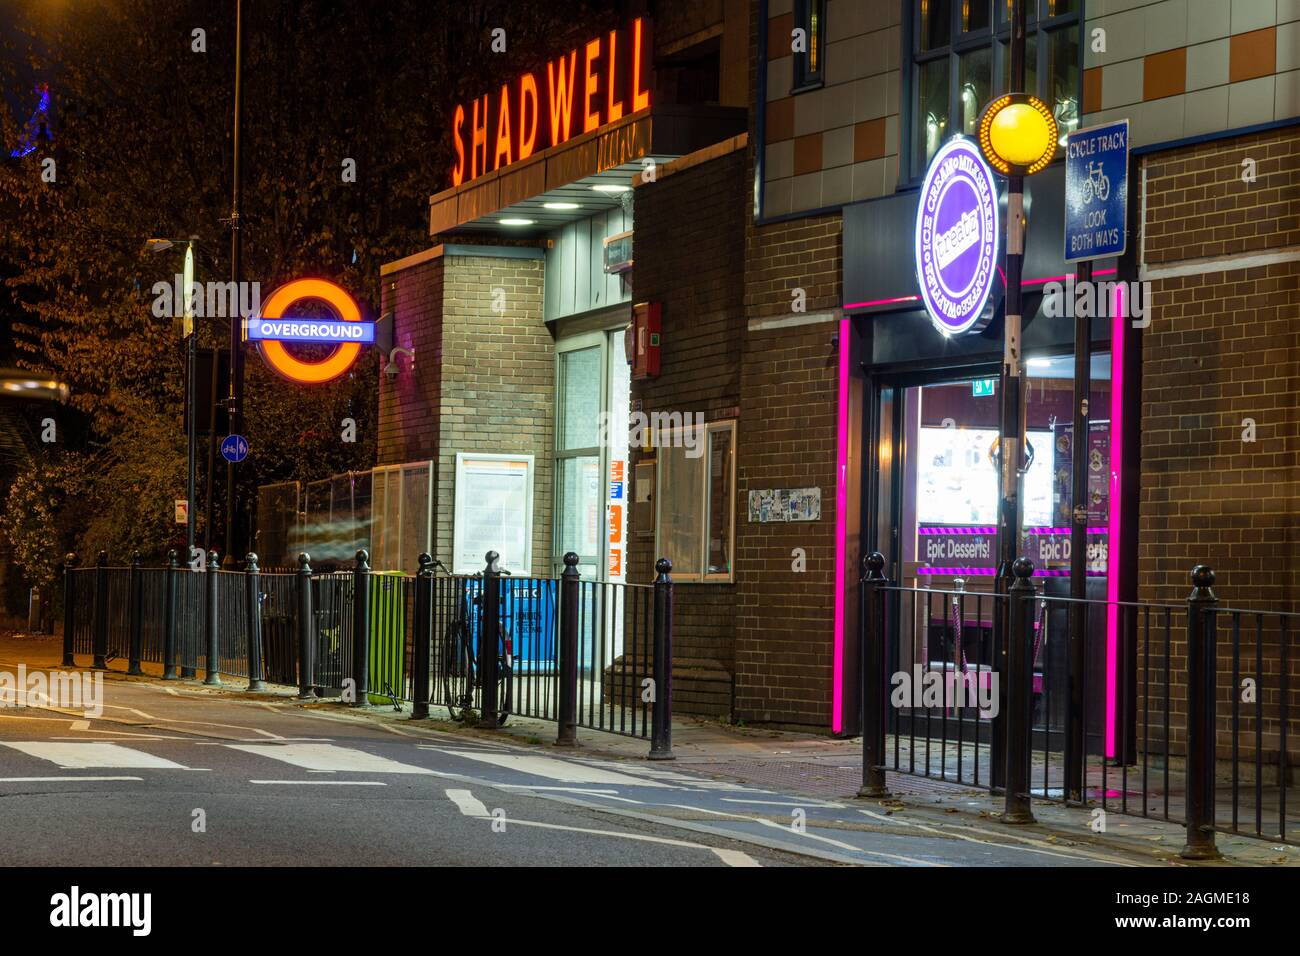 London, England, UK - November 18, 2019: Shadwell station on the East London Line of the Overground is lit at night on Cable Street in the East End. Stock Photo